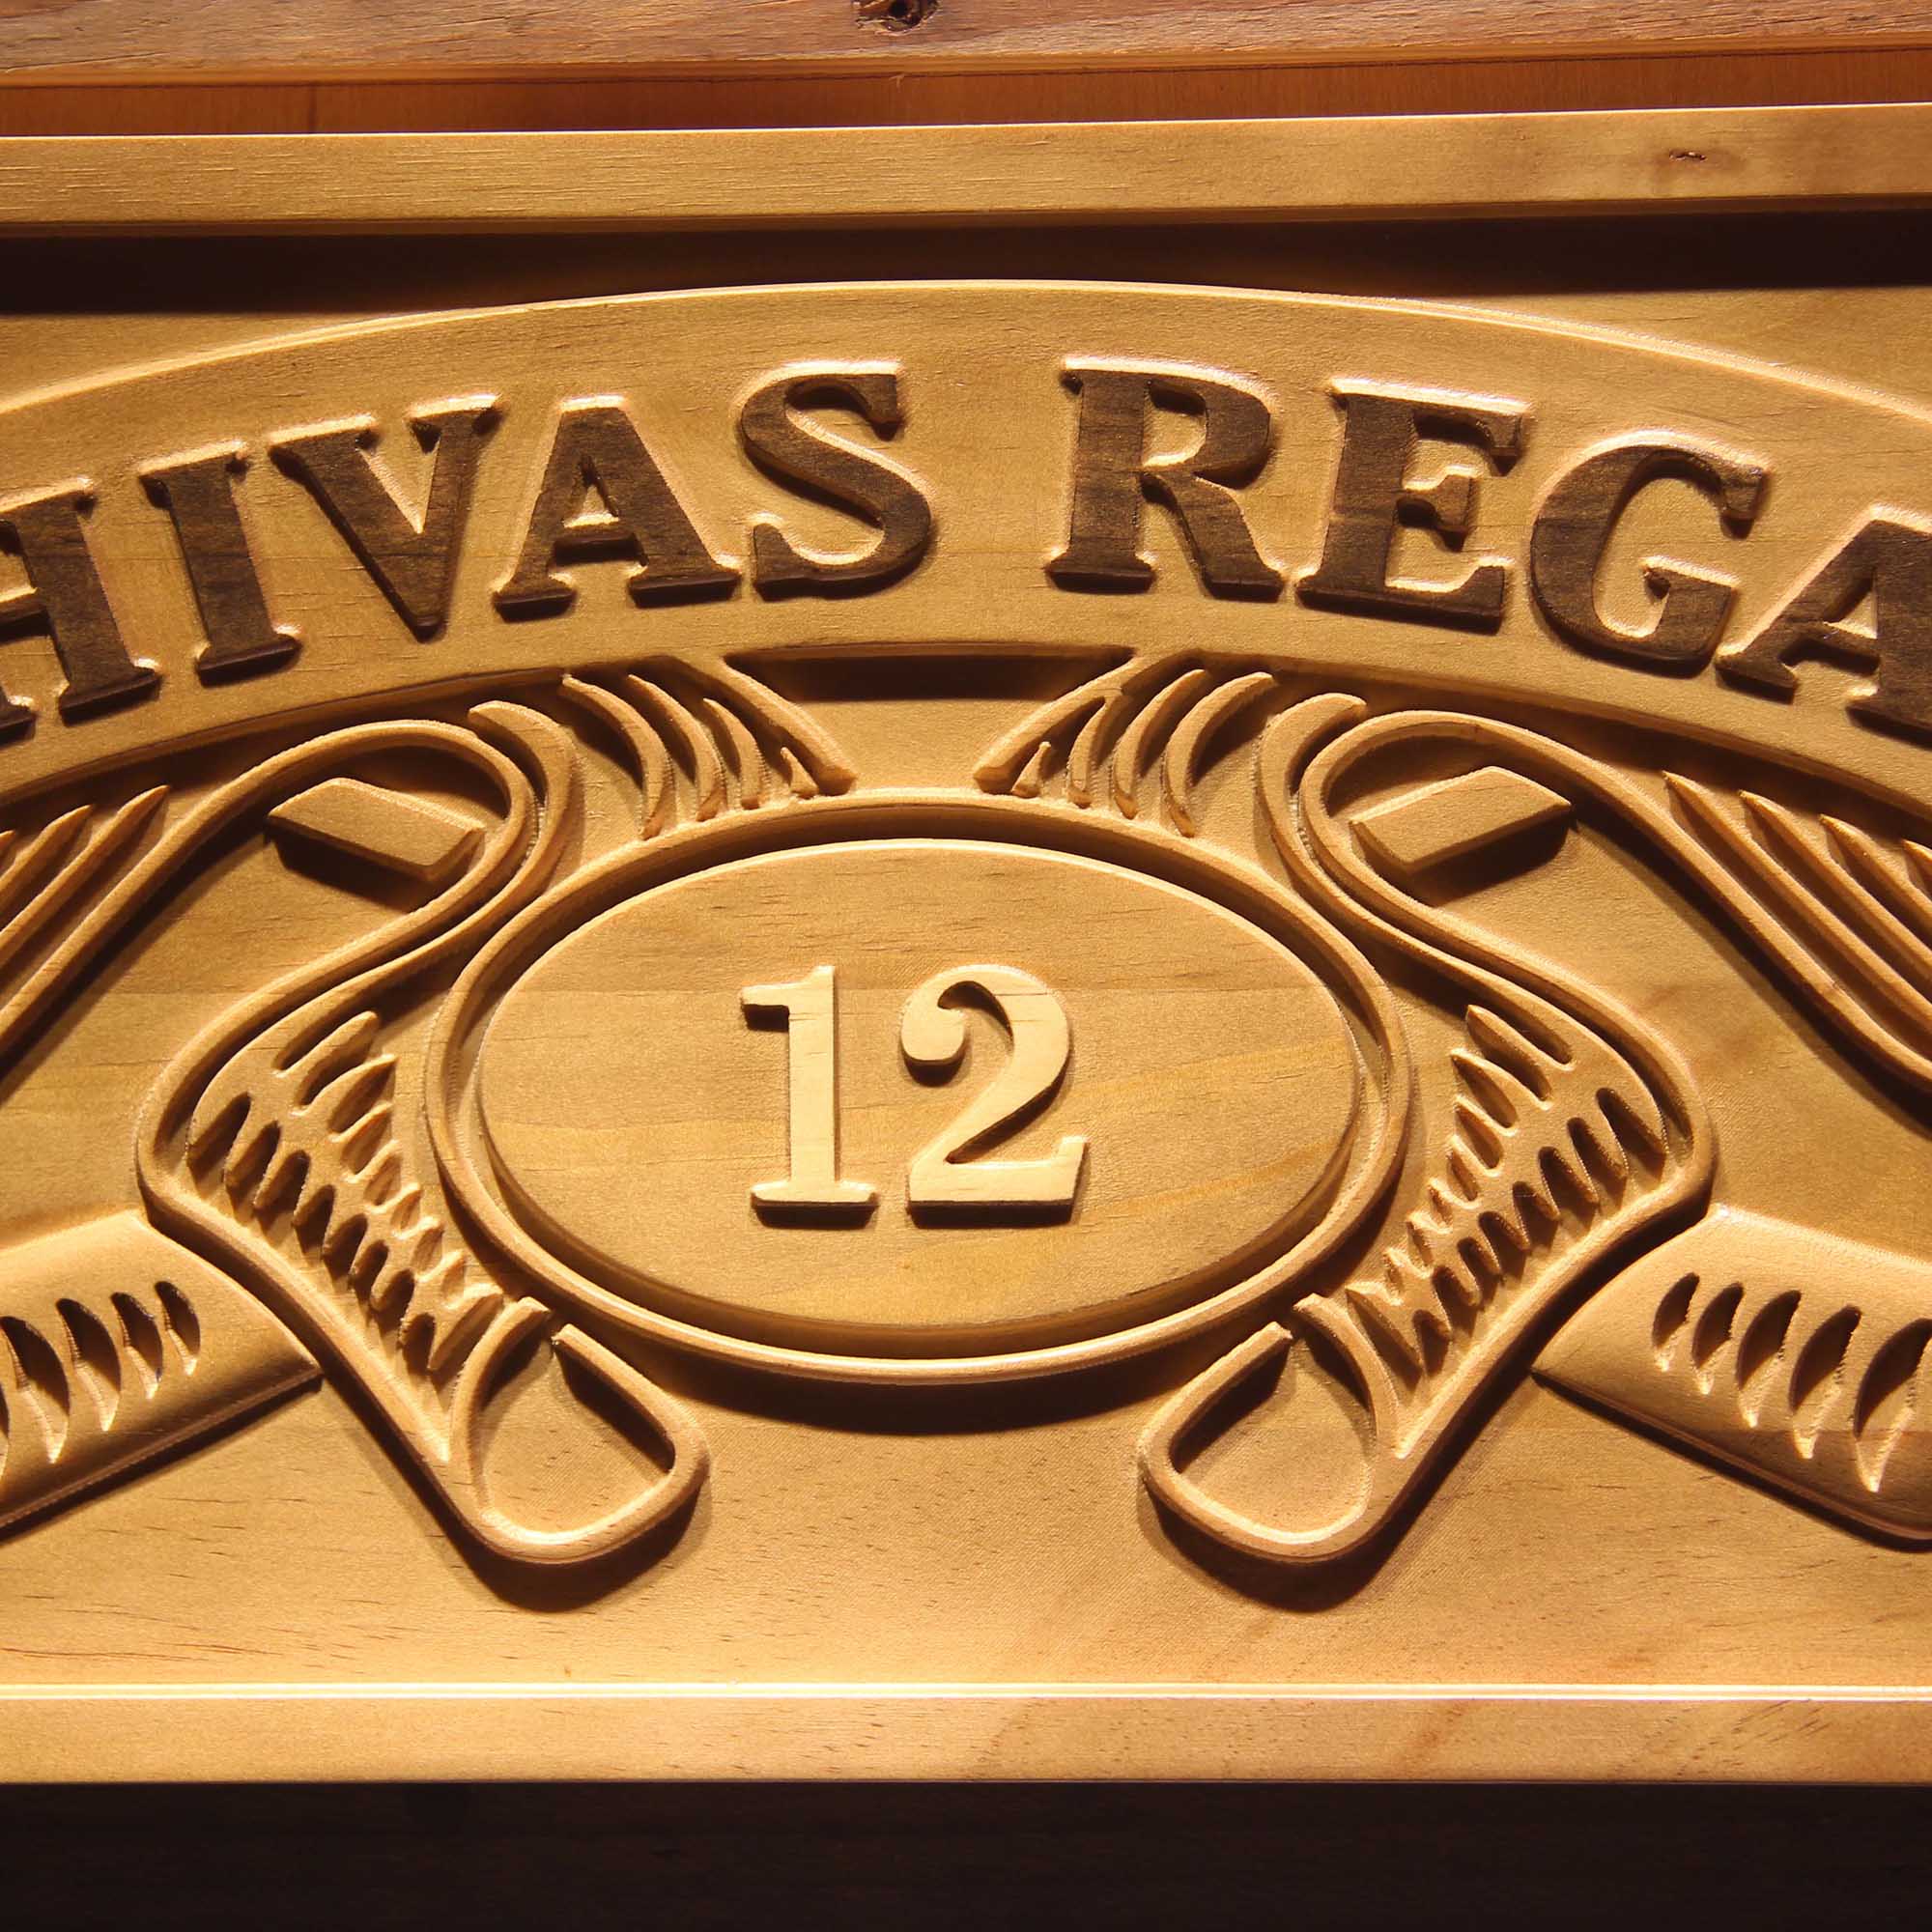 Chivas Regal Whiskey 3D Solid Wooden Craving Sign